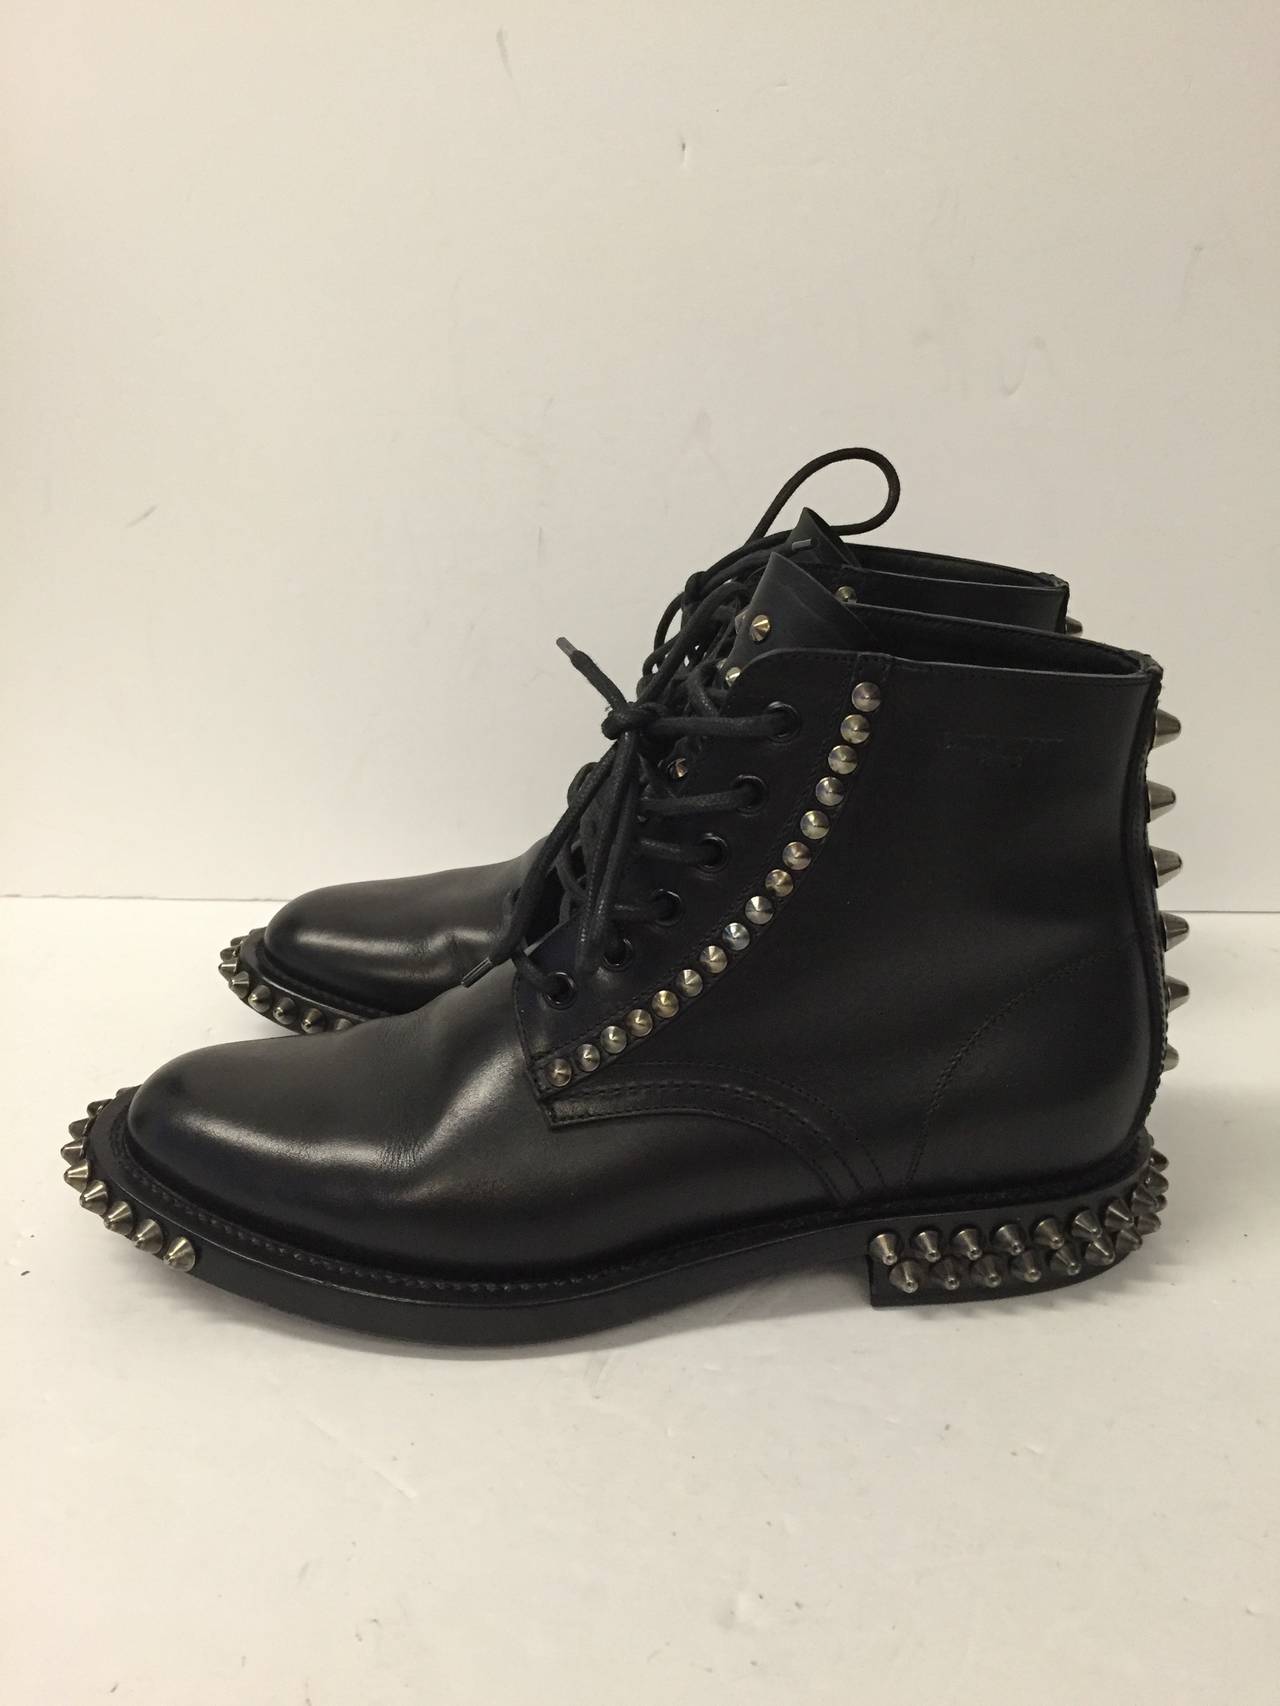 Ankle high leather boots in black. Round toe. Silver tone hardware. Cone spikes throughout. Black lace up closure with black eyelets. Embossed logo at collar. Paneled upper. Tonal stitching.

Size: 40

Worn twice!